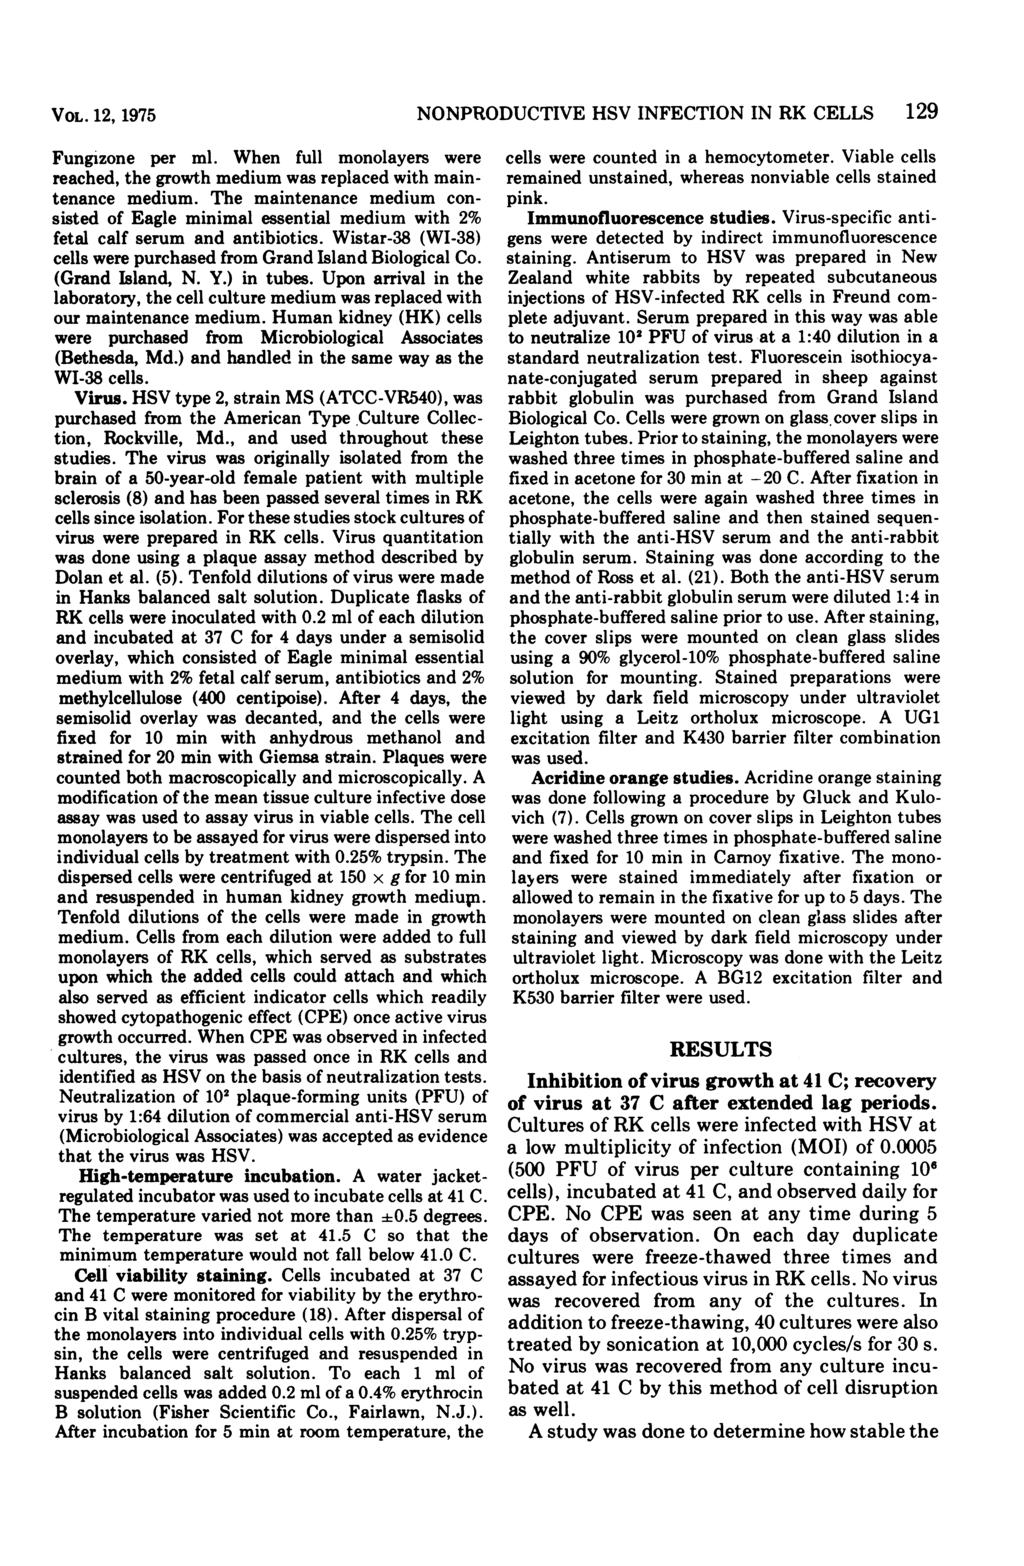 VOL. 12, 1975 Fungizone per ml. When full monolayers were reached, the growth medium was replaced with maintenance medium.